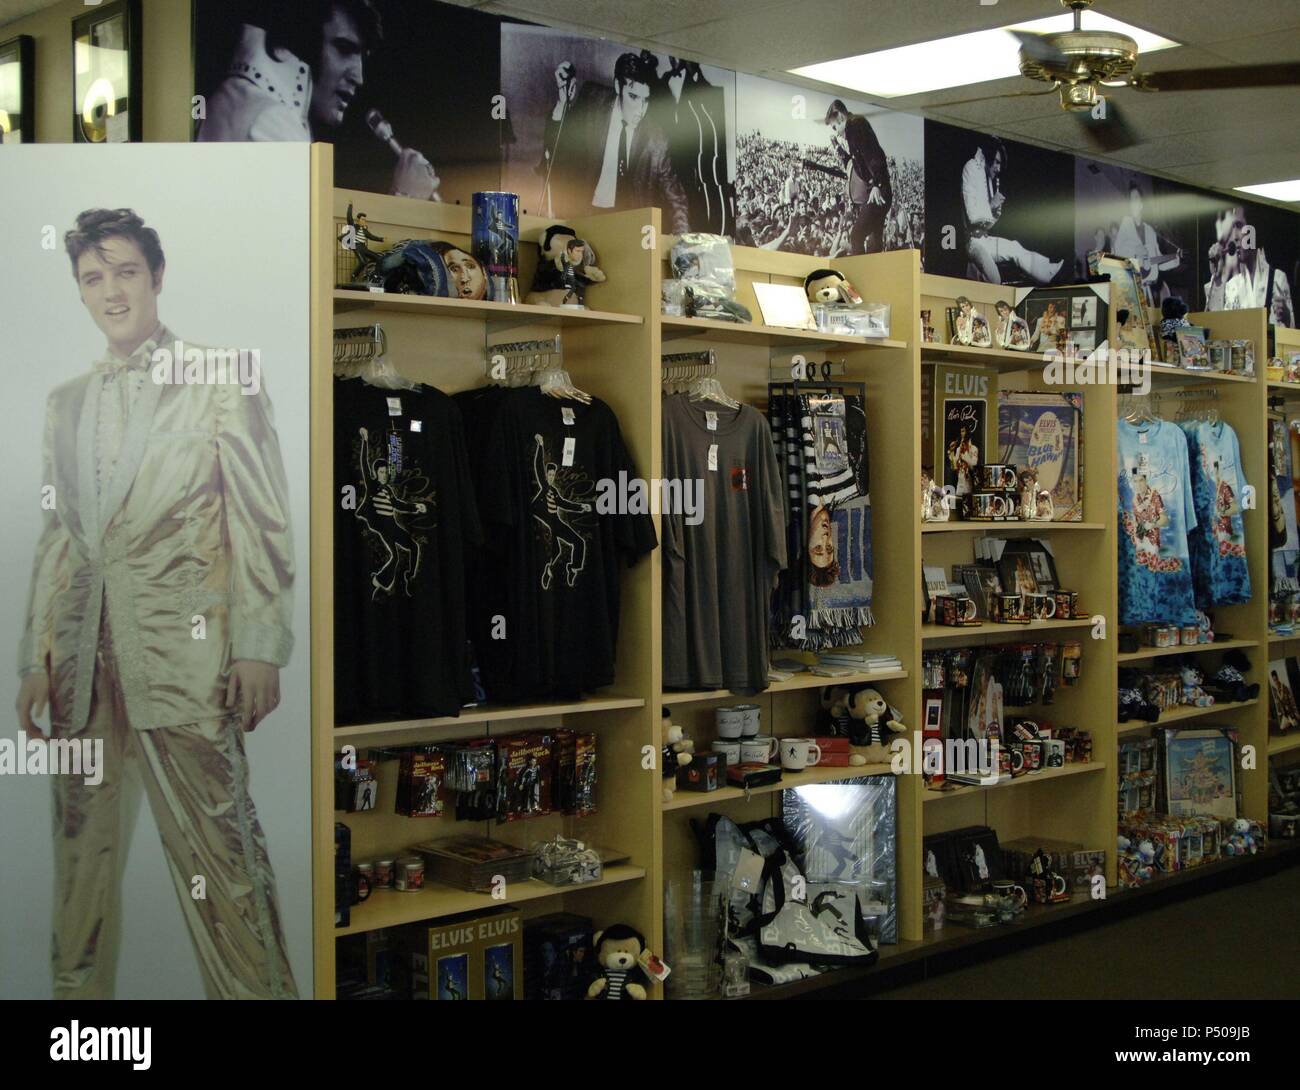 Interior Of The House Of Elvis Presley Banque d&#39;image et photos - Alamy